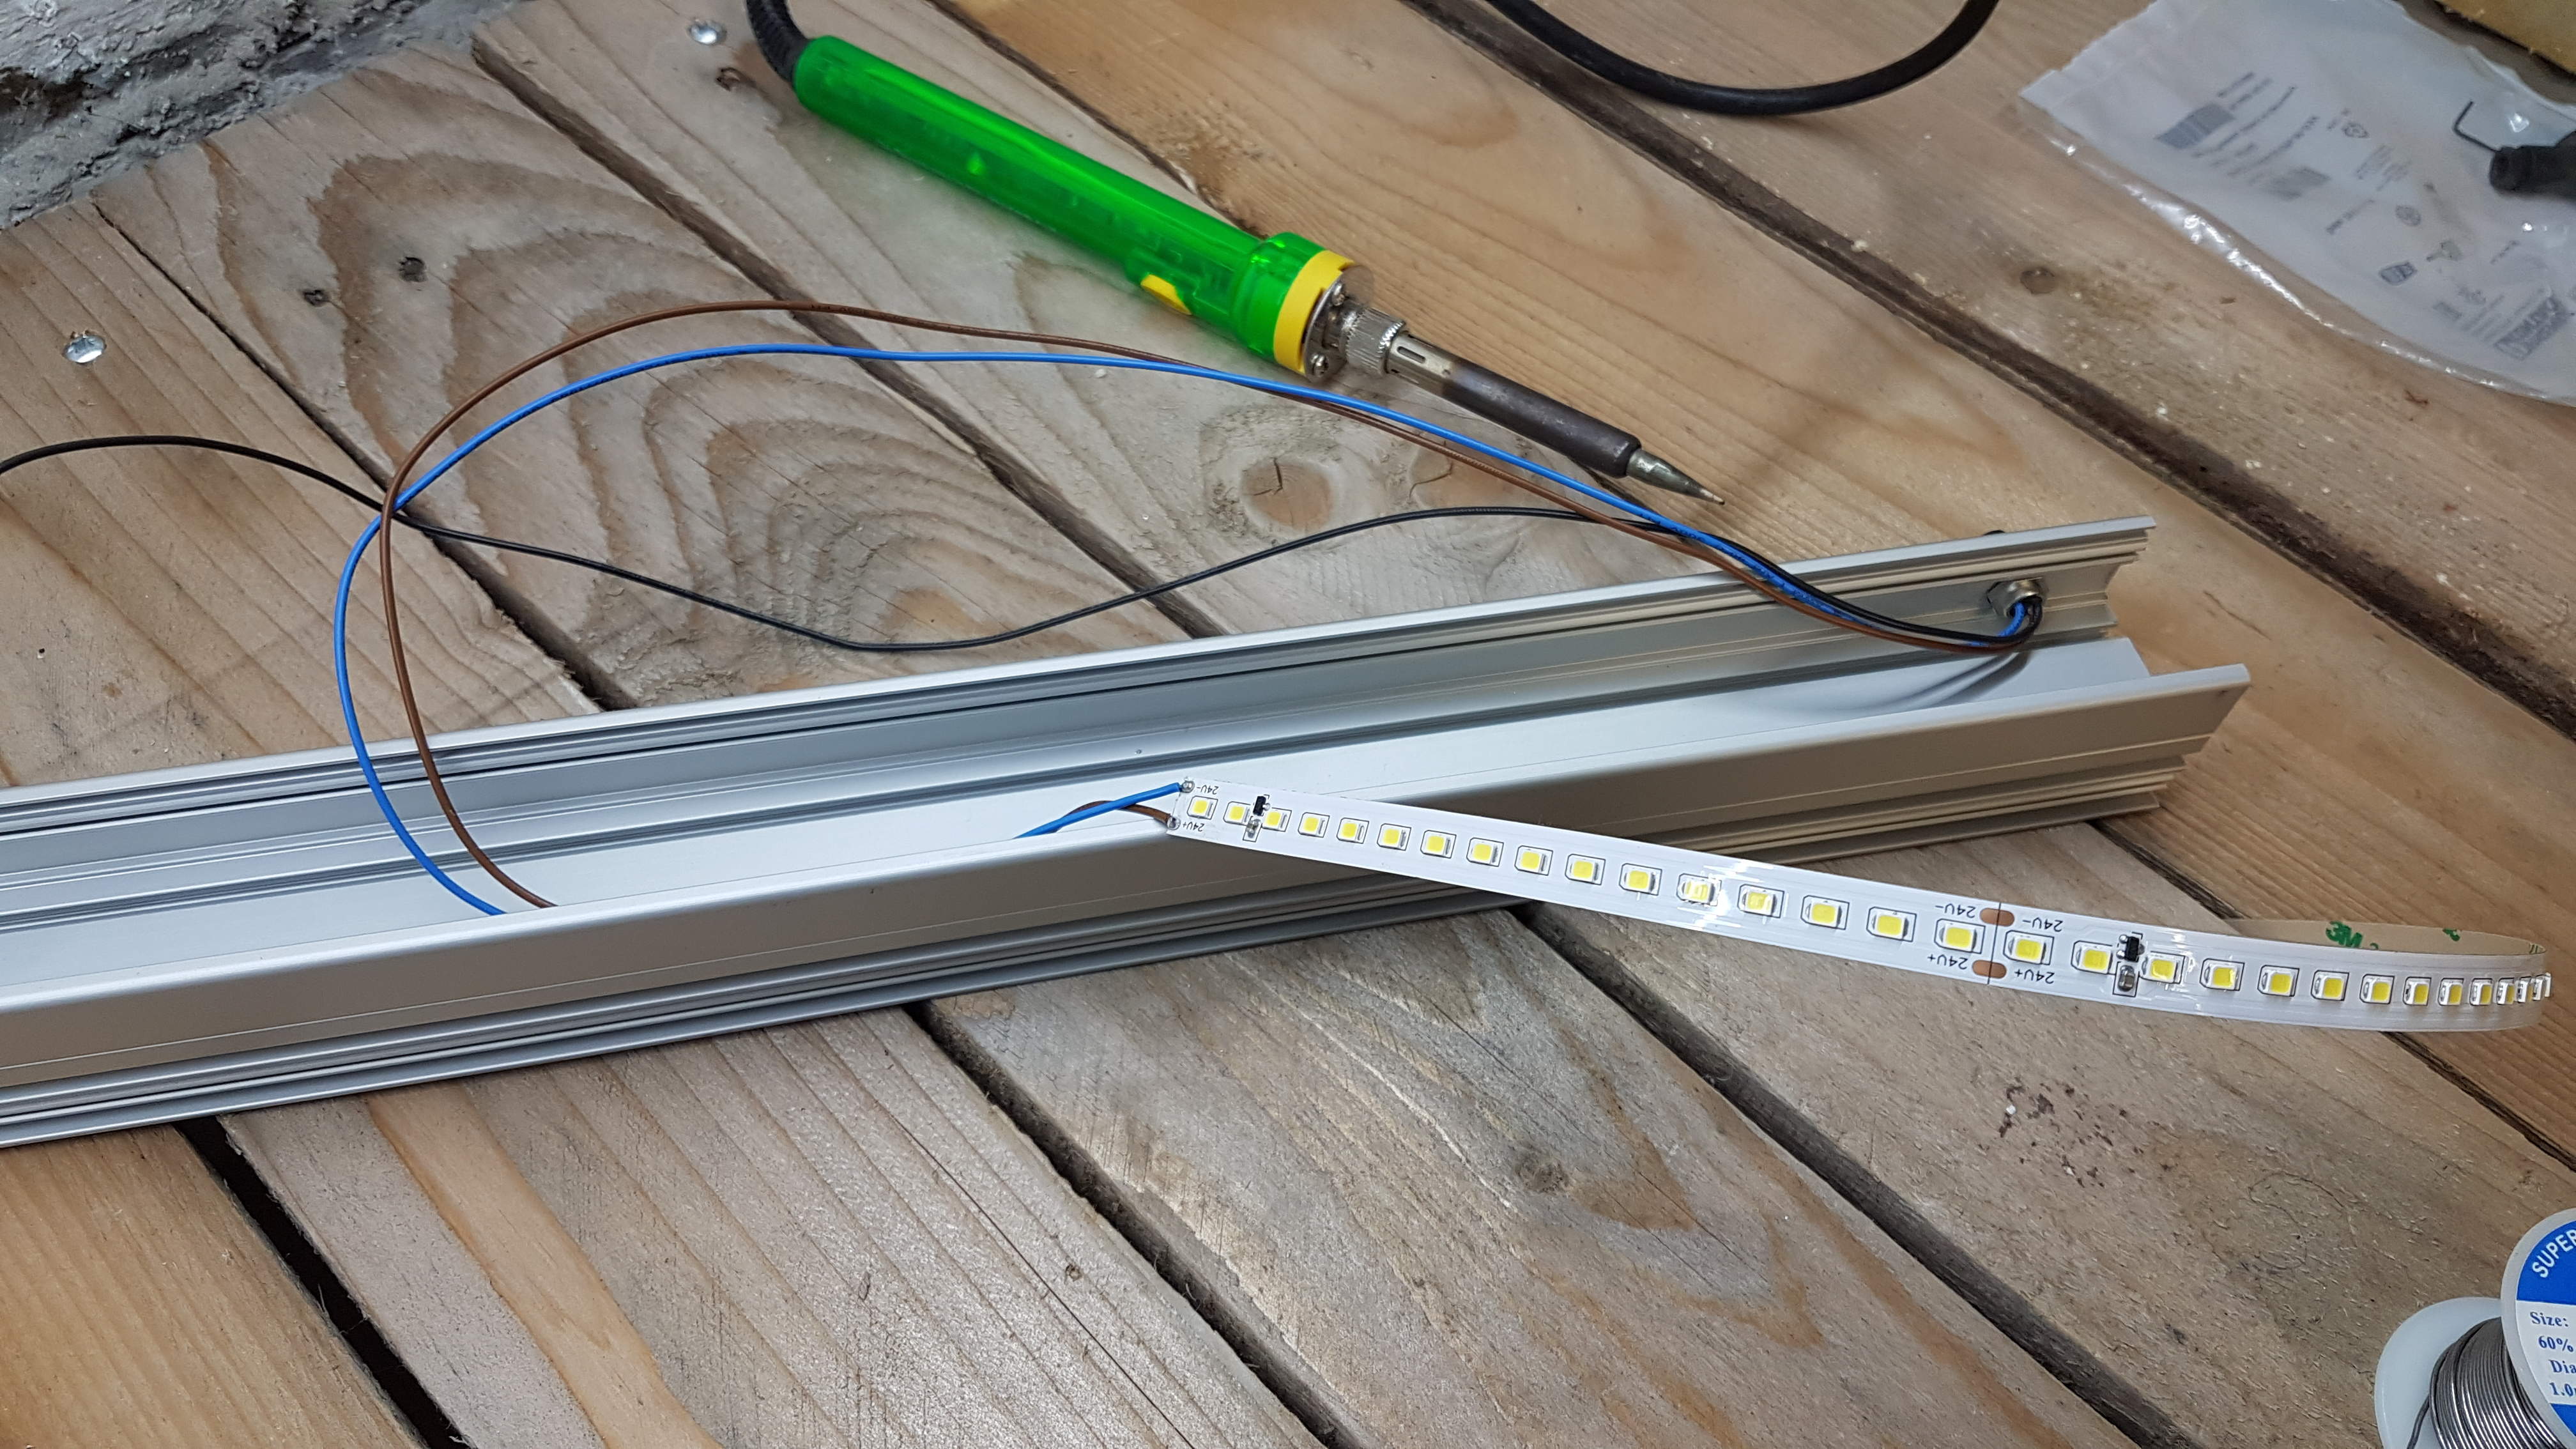 The LED strip is soldered to the connector cables